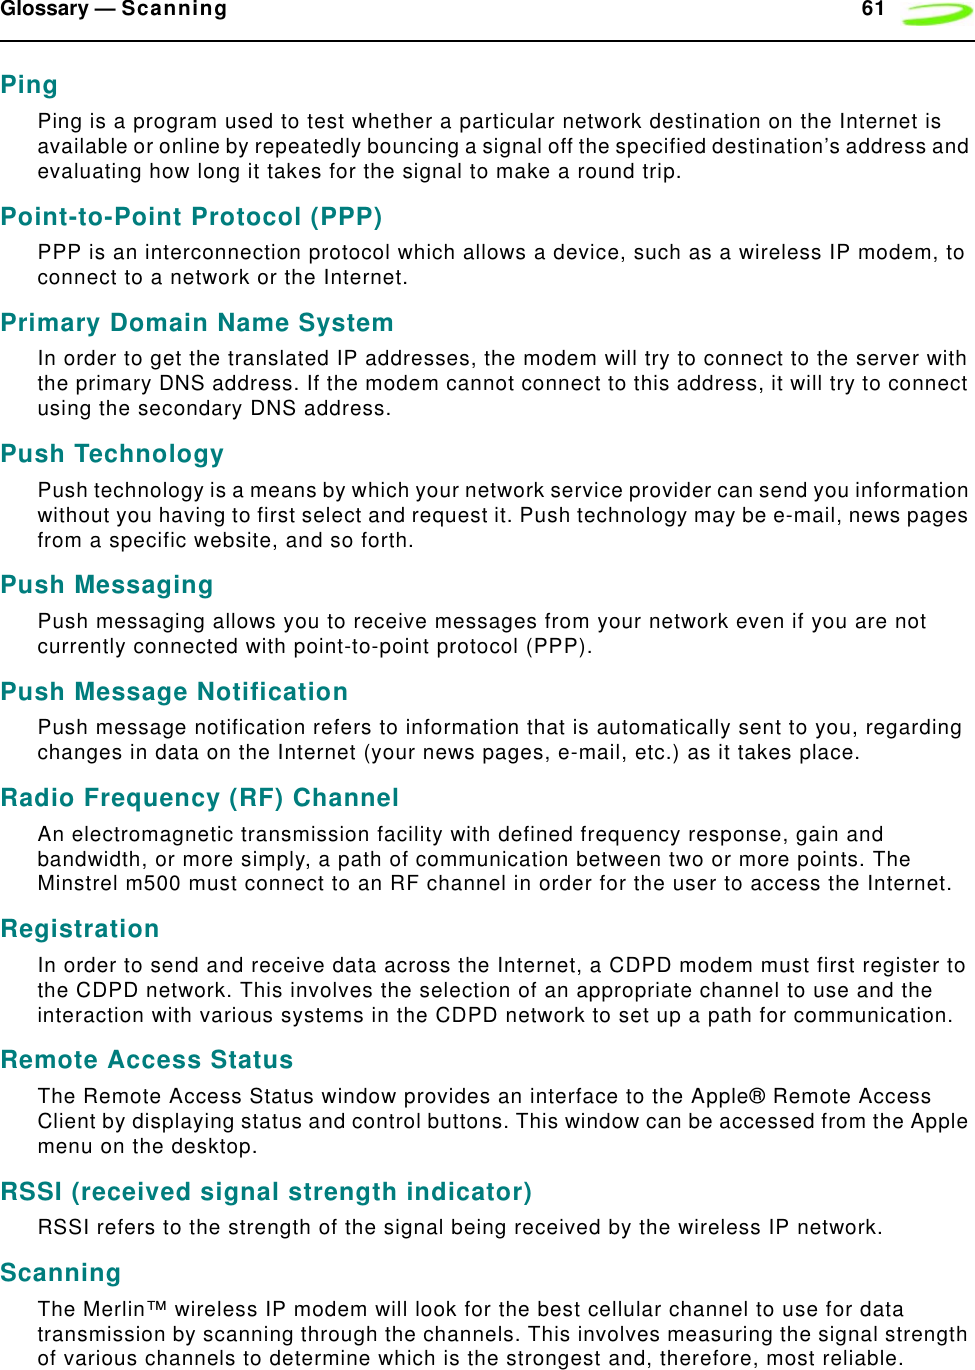 Glossary — Scanning 61PingPing is a program used to test whether a particular network destination on the Internet is available or online by repeatedly bouncing a signal off the specified destination’s address and evaluating how long it takes for the signal to make a round trip. Point-to-Point Protocol (PPP)PPP is an interconnection protocol which allows a device, such as a wireless IP modem, to connect to a network or the Internet.Primary Domain Name SystemIn order to get the translated IP addresses, the modem will try to connect to the server with the primary DNS address. If the modem cannot connect to this address, it will try to connect using the secondary DNS address.Push TechnologyPush technology is a means by which your network service provider can send you information without you having to first select and request it. Push technology may be e-mail, news pages from a specific website, and so forth.Push MessagingPush messaging allows you to receive messages from your network even if you are not currently connected with point-to-point protocol (PPP).Push Message NotificationPush message notification refers to information that is automatically sent to you, regarding changes in data on the Internet (your news pages, e-mail, etc.) as it takes place.Radio Frequency (RF) ChannelAn electromagnetic transmission facility with defined frequency response, gain and bandwidth, or more simply, a path of communication between two or more points. The Minstrel m500 must connect to an RF channel in order for the user to access the Internet.RegistrationIn order to send and receive data across the Internet, a CDPD modem must first register to the CDPD network. This involves the selection of an appropriate channel to use and the interaction with various systems in the CDPD network to set up a path for communication.Remote Access StatusThe Remote Access Status window provides an interface to the Apple® Remote Access Client by displaying status and control buttons. This window can be accessed from the Apple menu on the desktop.RSSI (received signal strength indicator)RSSI refers to the strength of the signal being received by the wireless IP network.ScanningThe Merlin™ wireless IP modem will look for the best cellular channel to use for data transmission by scanning through the channels. This involves measuring the signal strength of various channels to determine which is the strongest and, therefore, most reliable.